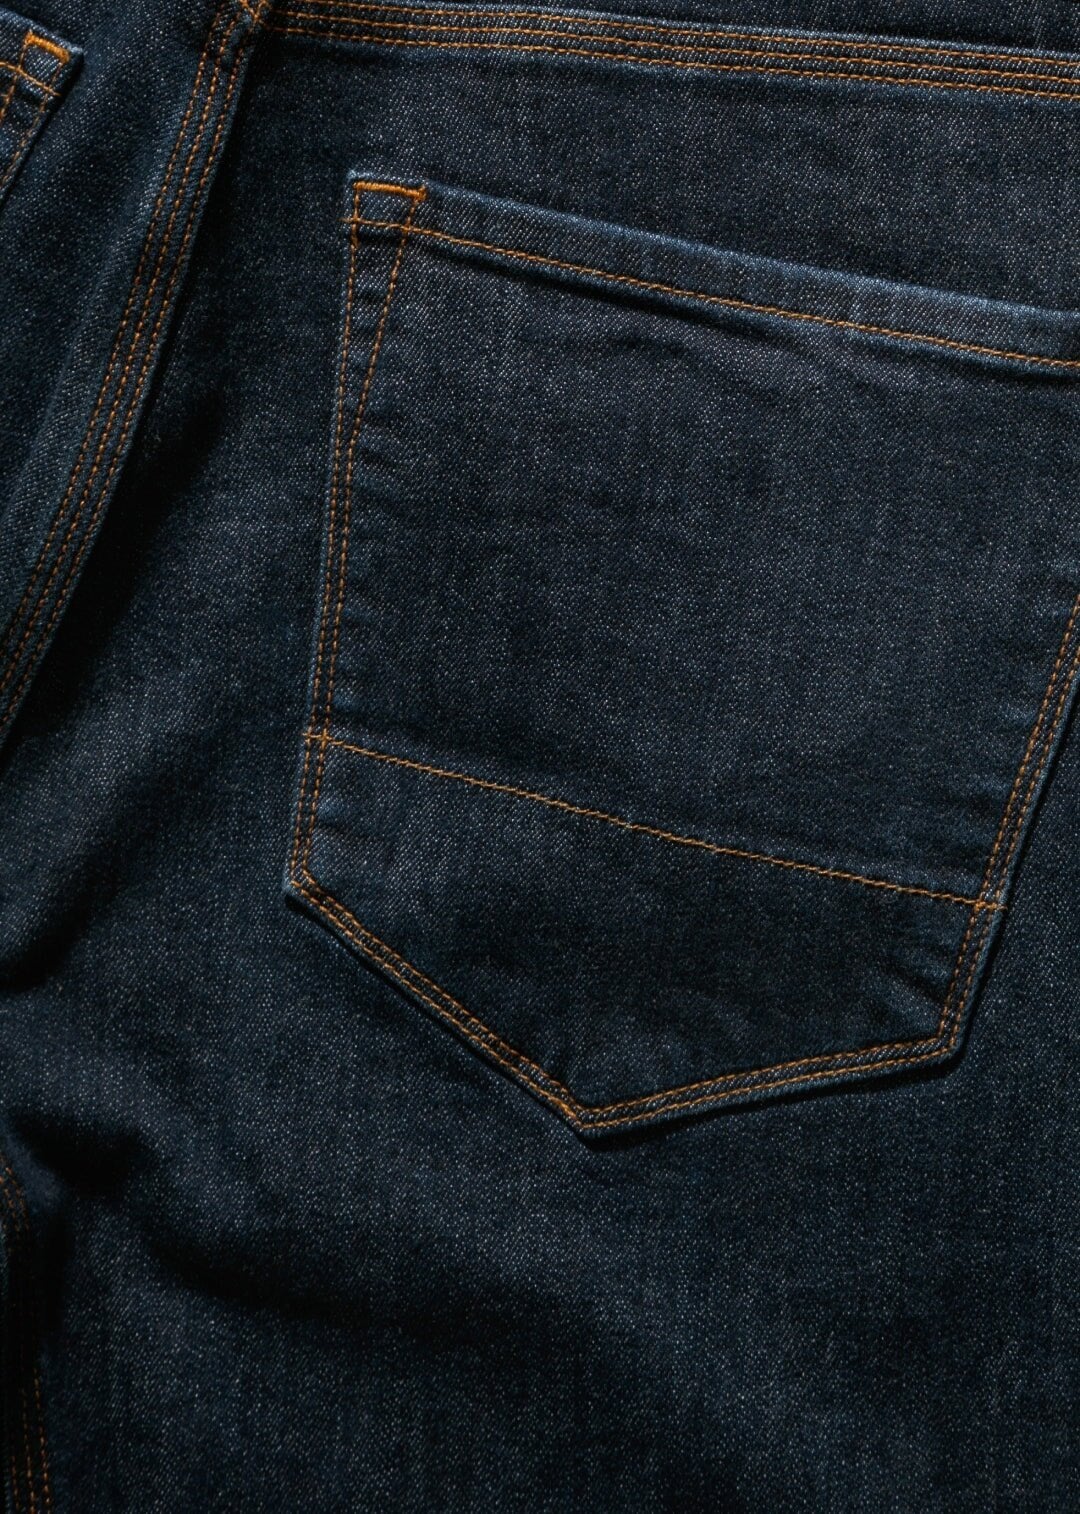 dark wash denim with accented copper stitching and trims